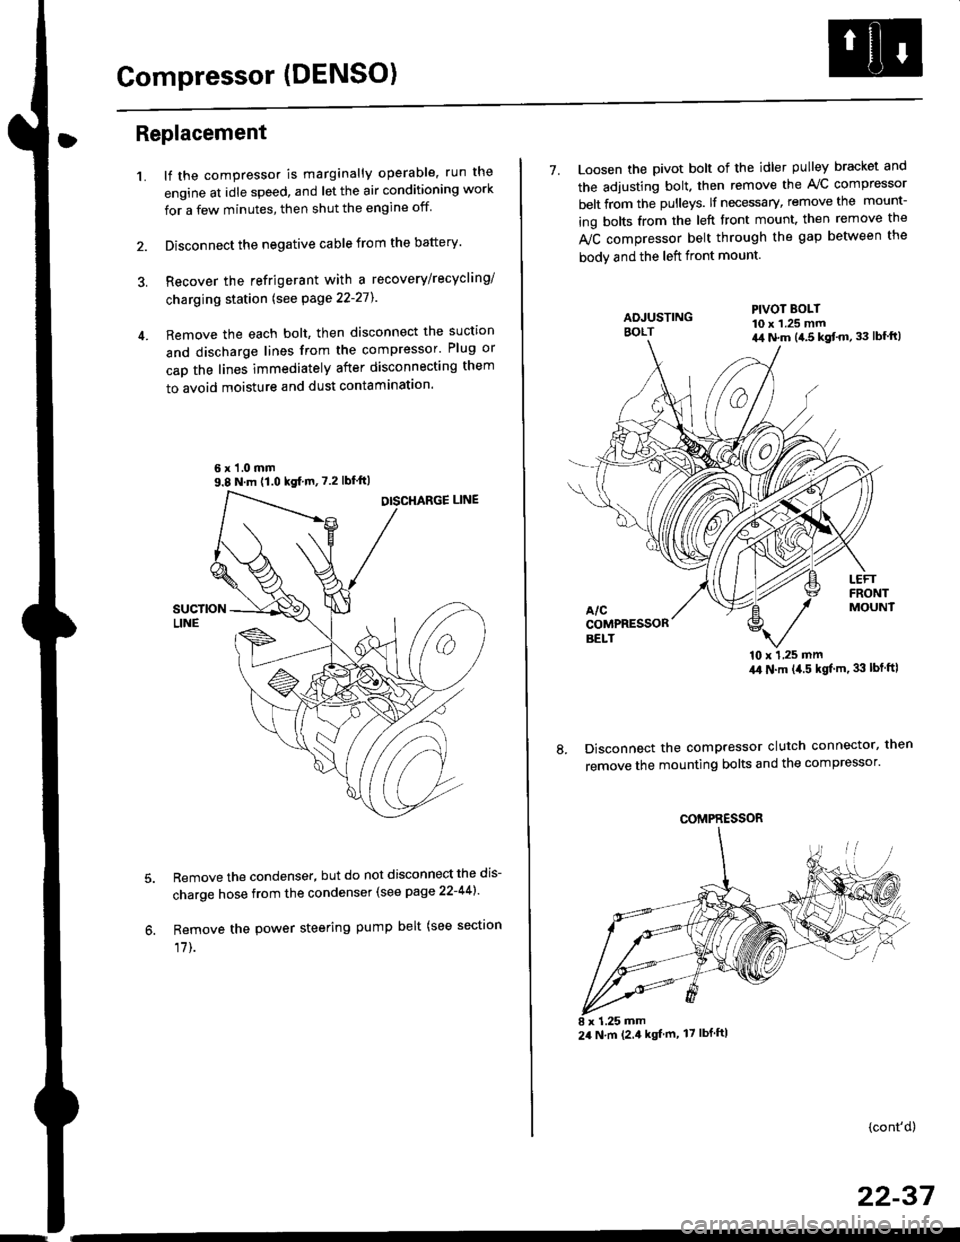 HONDA CIVIC 1998 6.G User Guide Compressor (DENSO)
Replacement
1.lf the compressor is marginally operable, run the
engine at idle speed, and let the air conditioning work
for a few minutes, then shut the engine off
Disconnect the ne